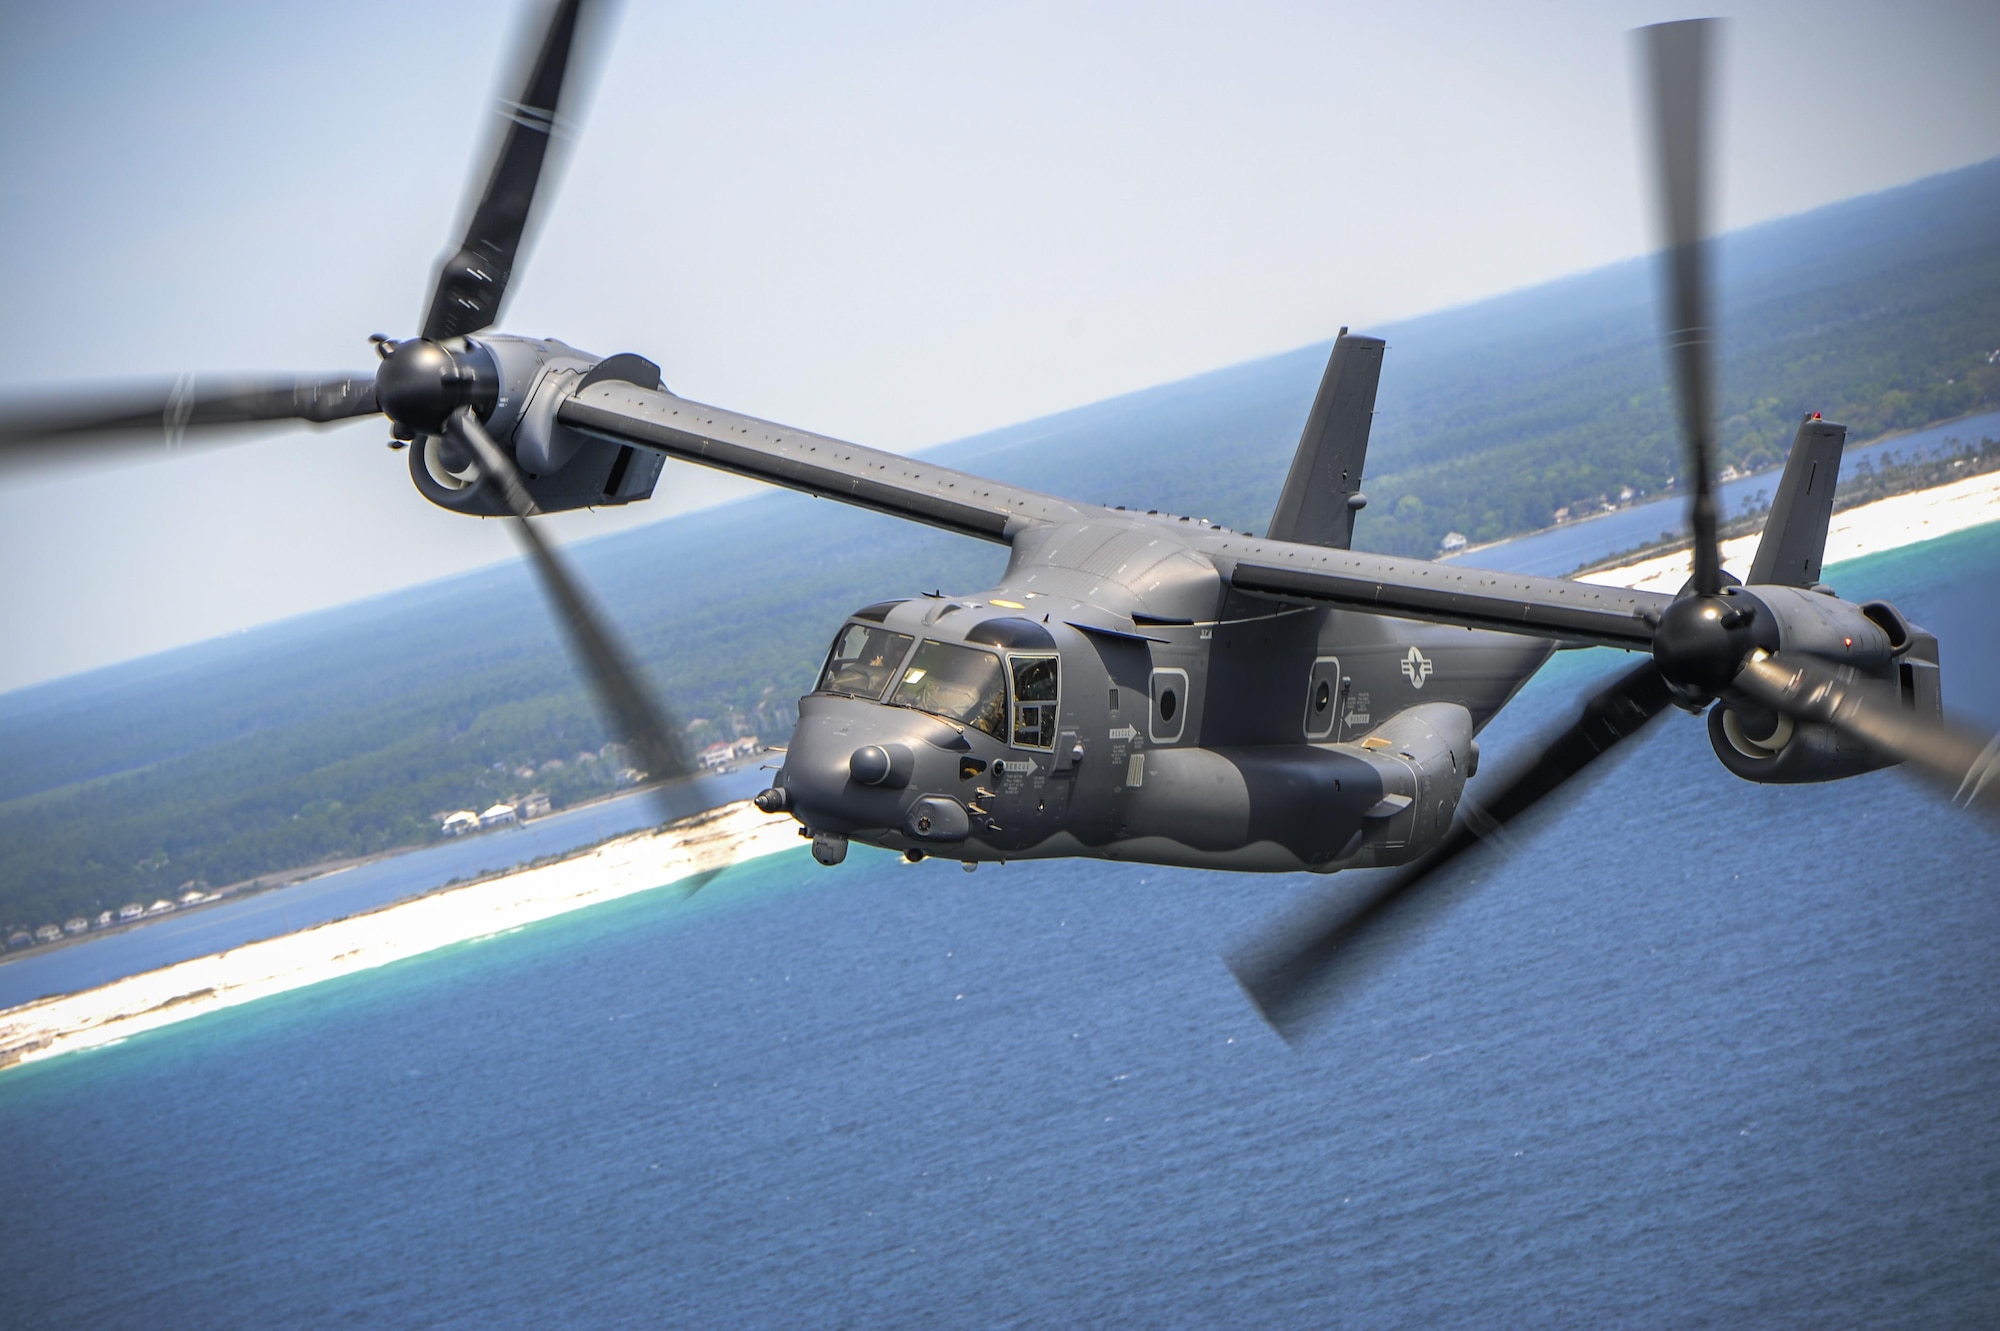 A CV-22 Osprey flies in formation with a MC-130H Combat Talon II over Fort Walton Beach, Fla., April 24, 2015. Two Ospreys trailed a MC-130 Combat Talon II during a flyover of the Hurlburt Field, Fla., Airpark during an annual Operation Eagle Claw ceremony.  (U.S. Air Force photo/Senior Airman Christopher Callaway)